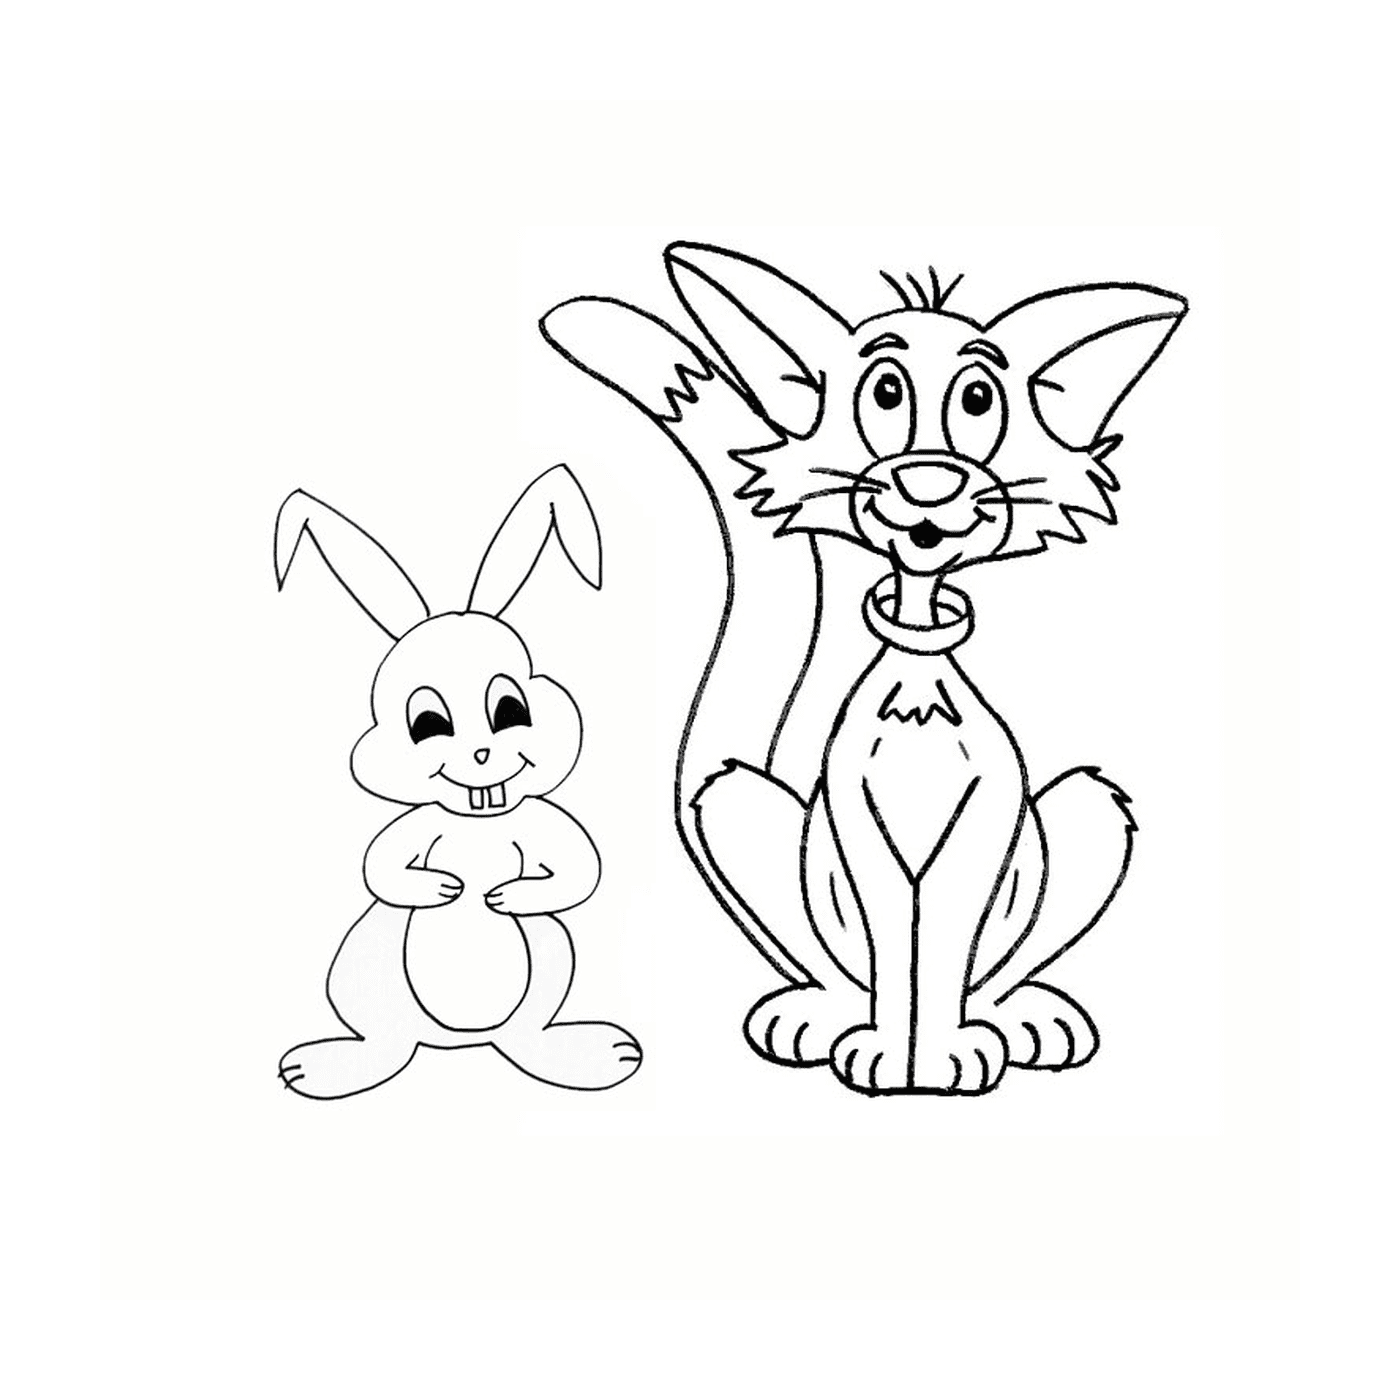  A cat and a rabbit drawn together 